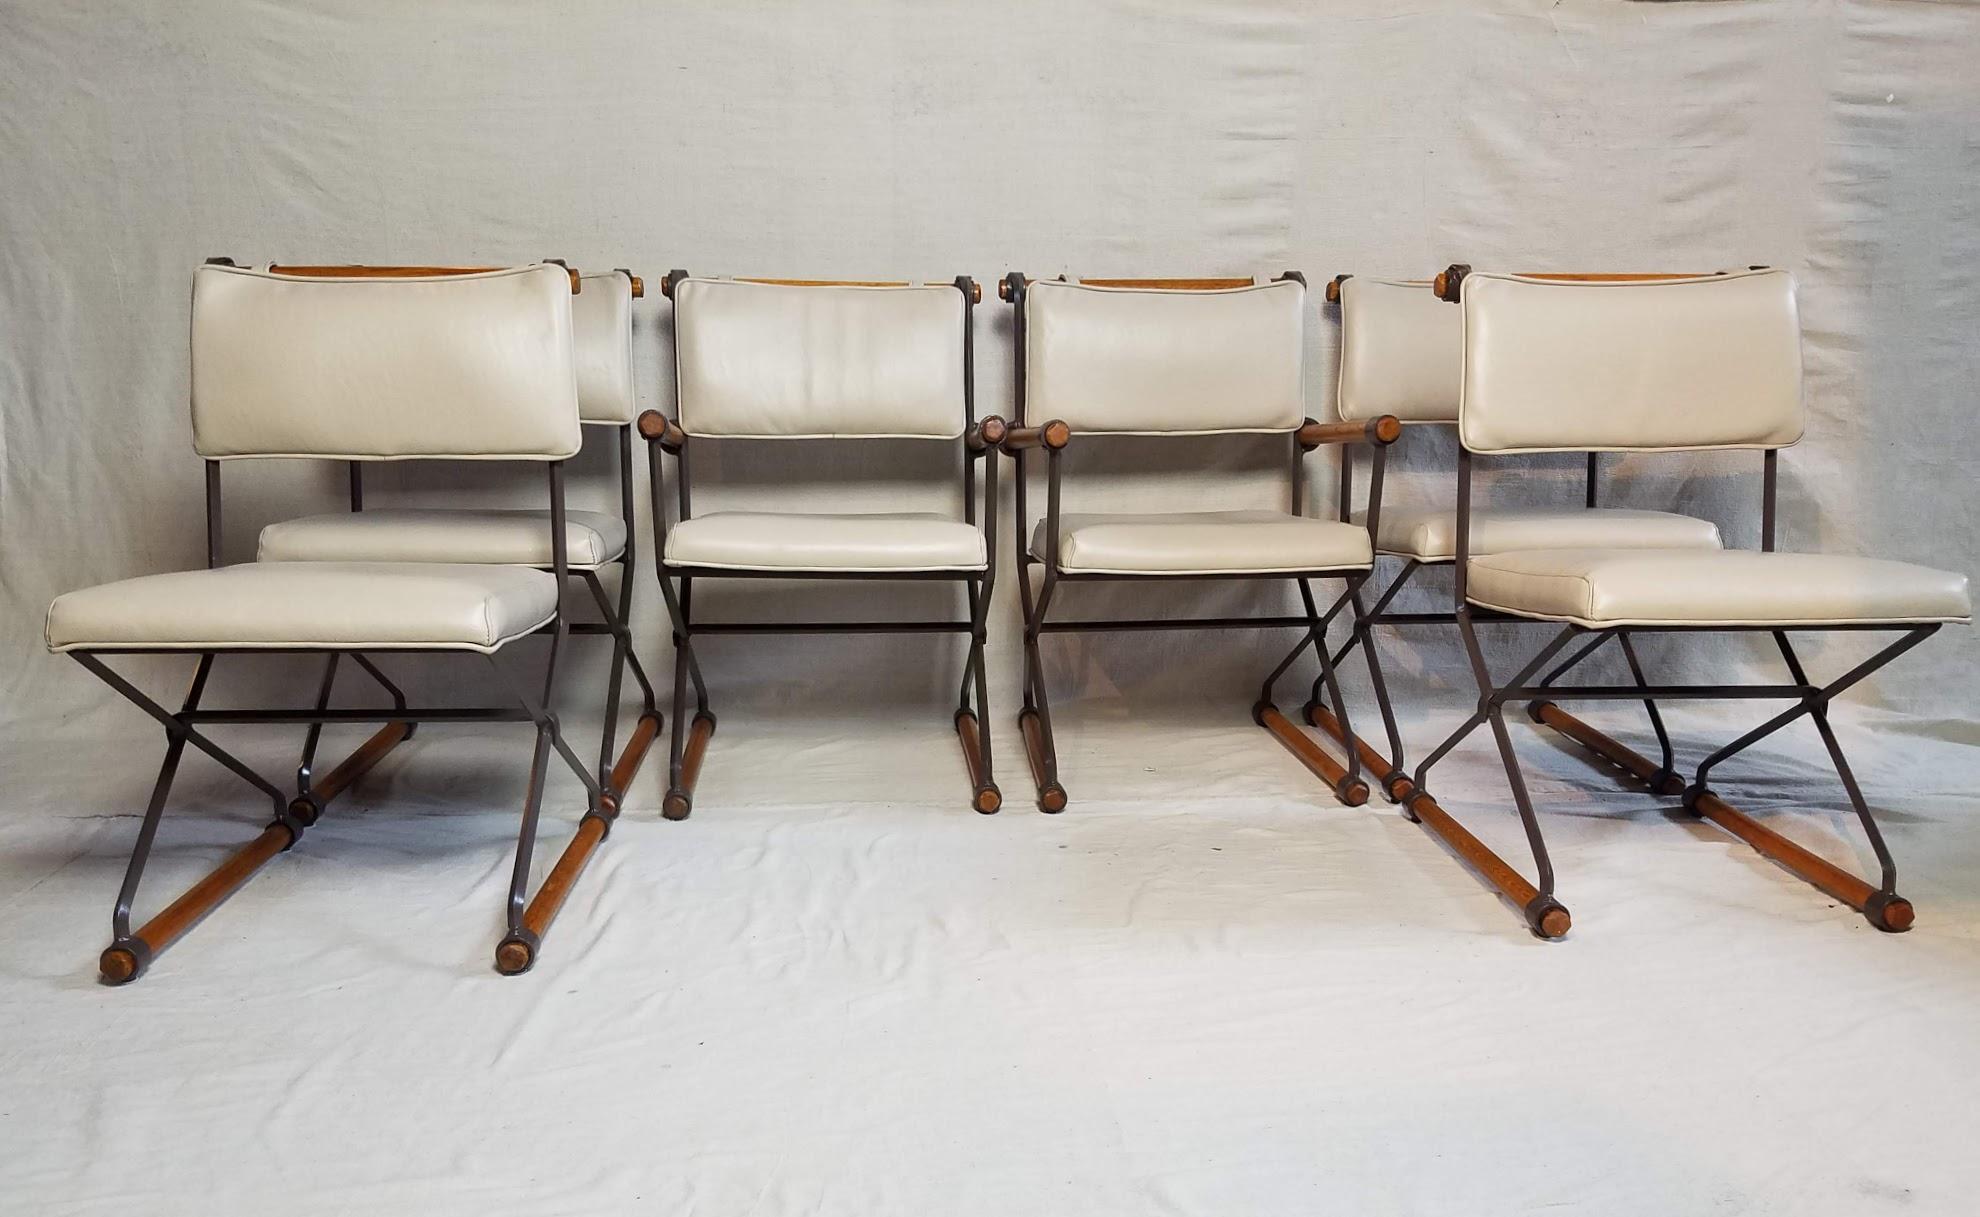 Six Cleo Baldon chairs from her Villa group manufactured by Terra in the mid-1960s thru the mid-1970s.
The wrought iron chairs are lacquered in their original warm chocolate color with fumed oak rods.
A variant of this chair was featured in the